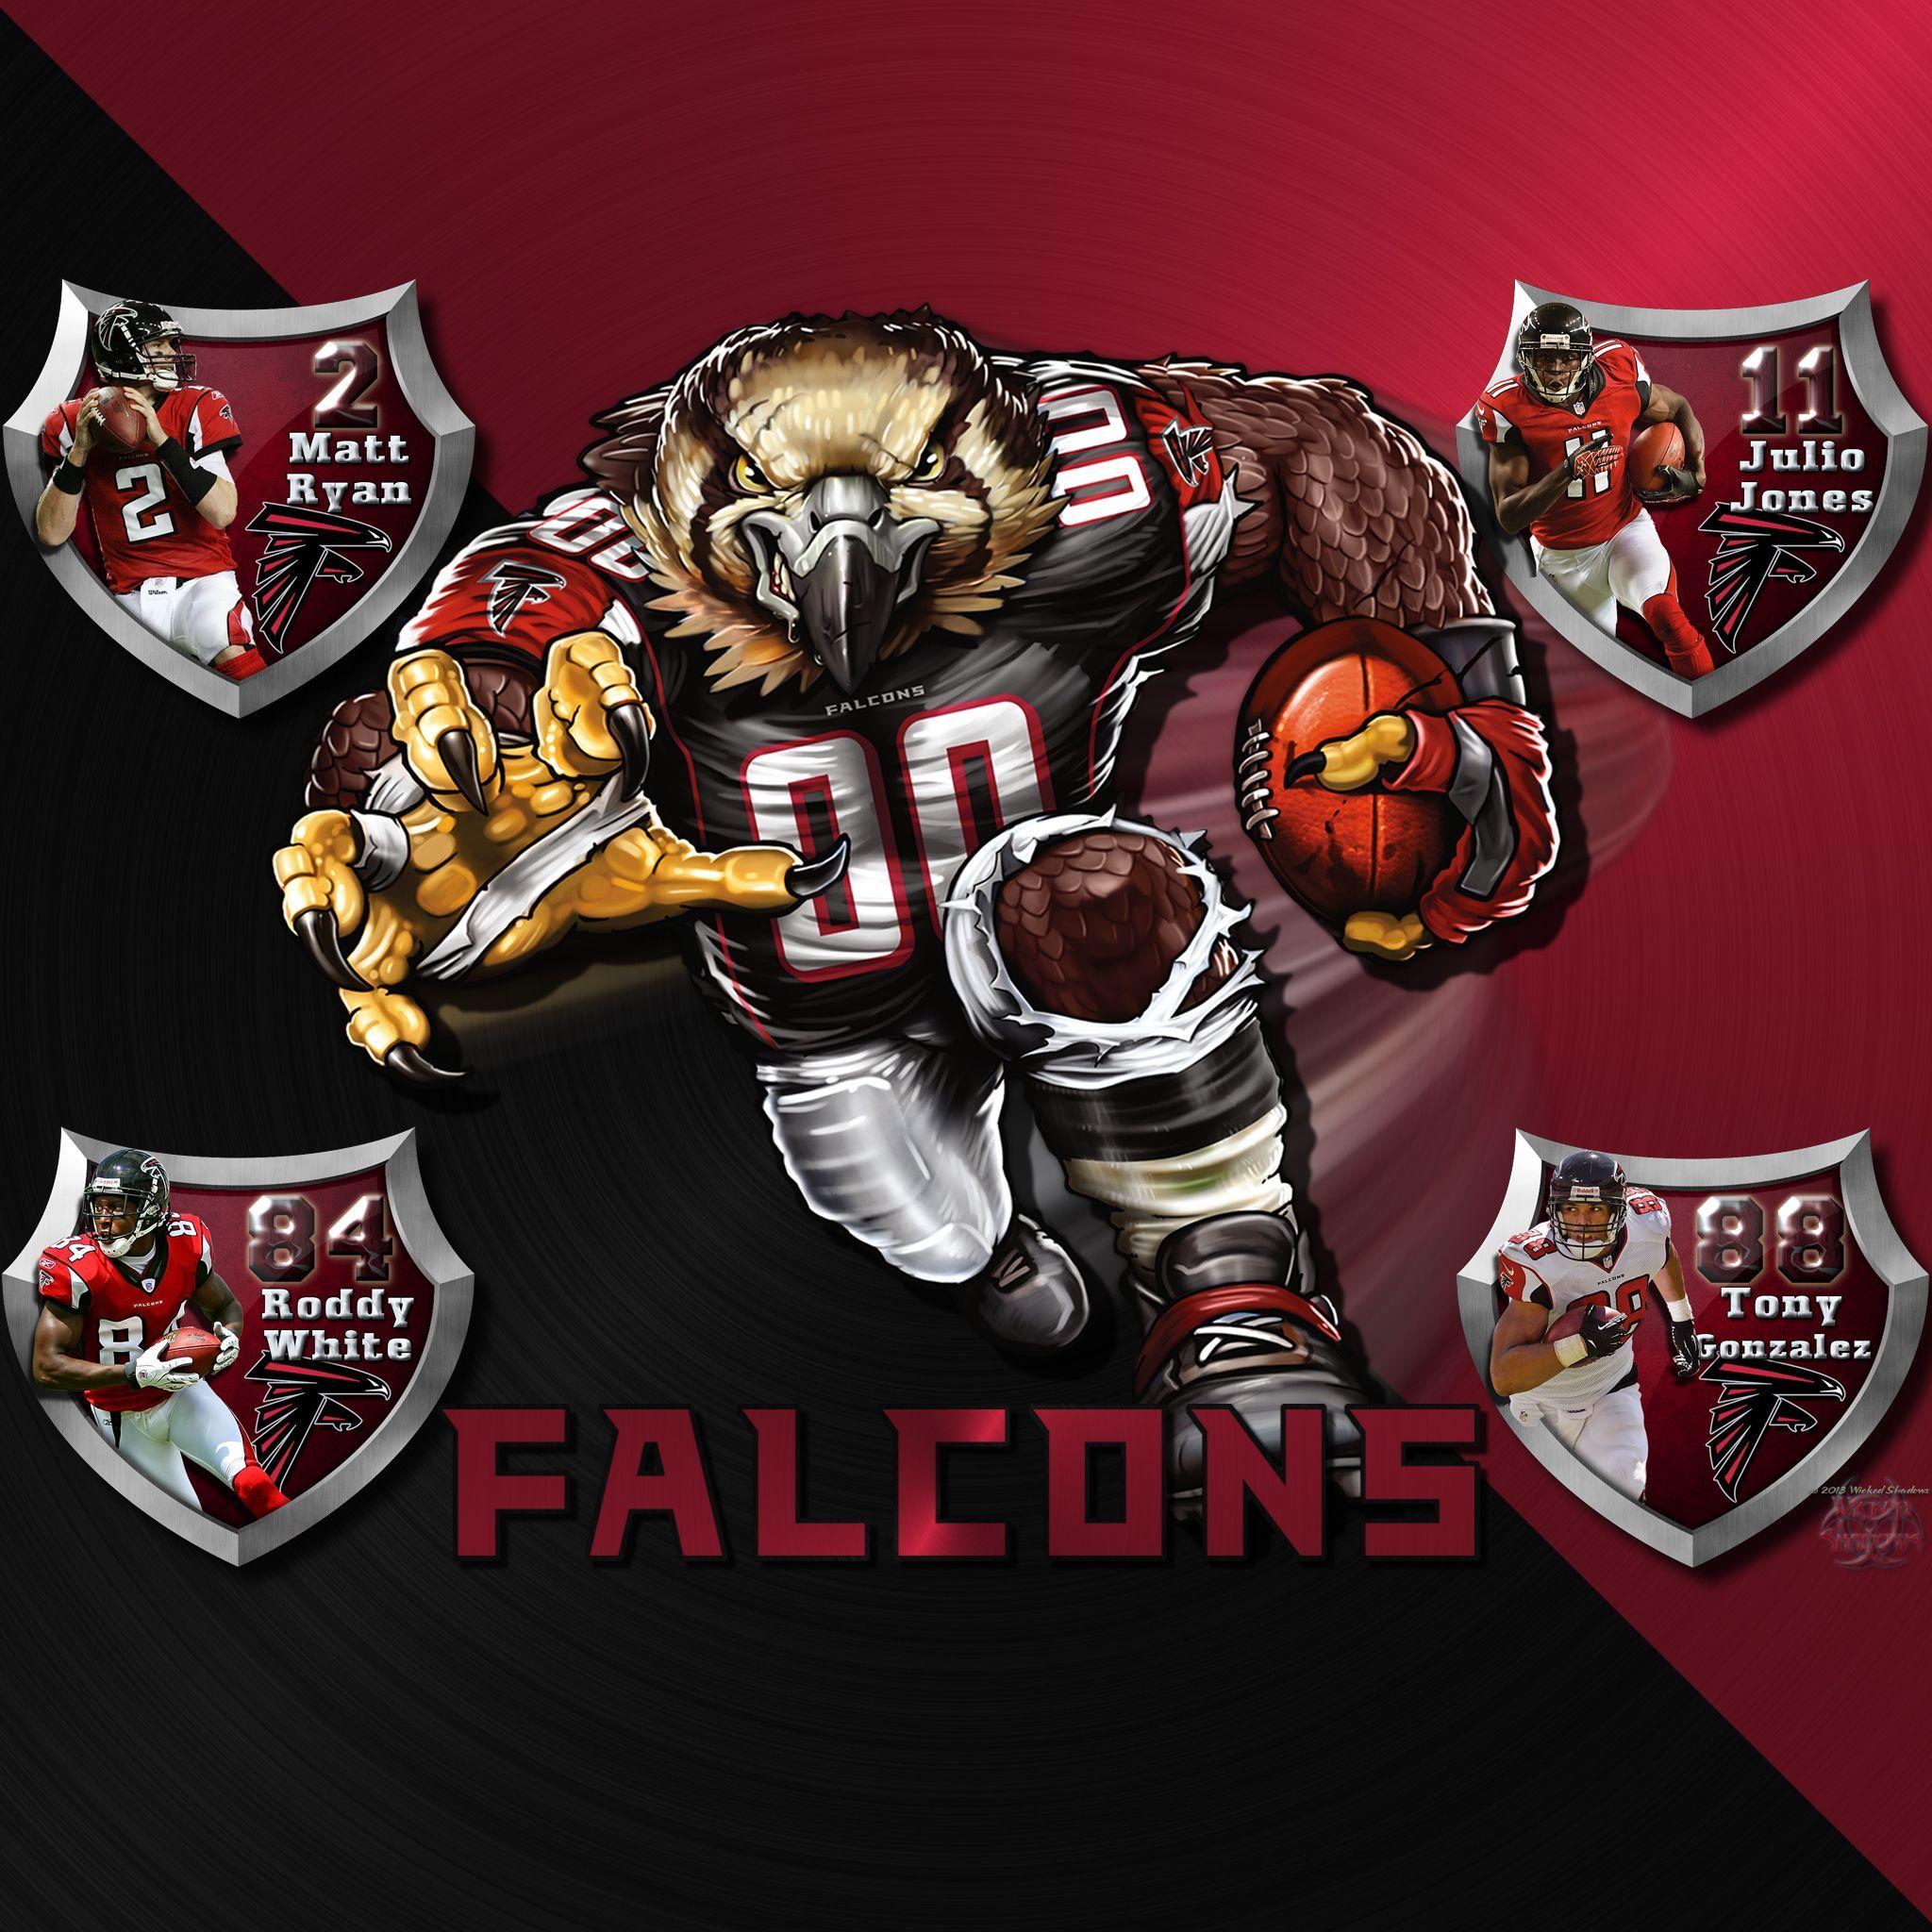 Atlanta Falcons Logo - Atlanta Falcons Logo Wallpaper | IPhone / iPod Touch | Ipad ...